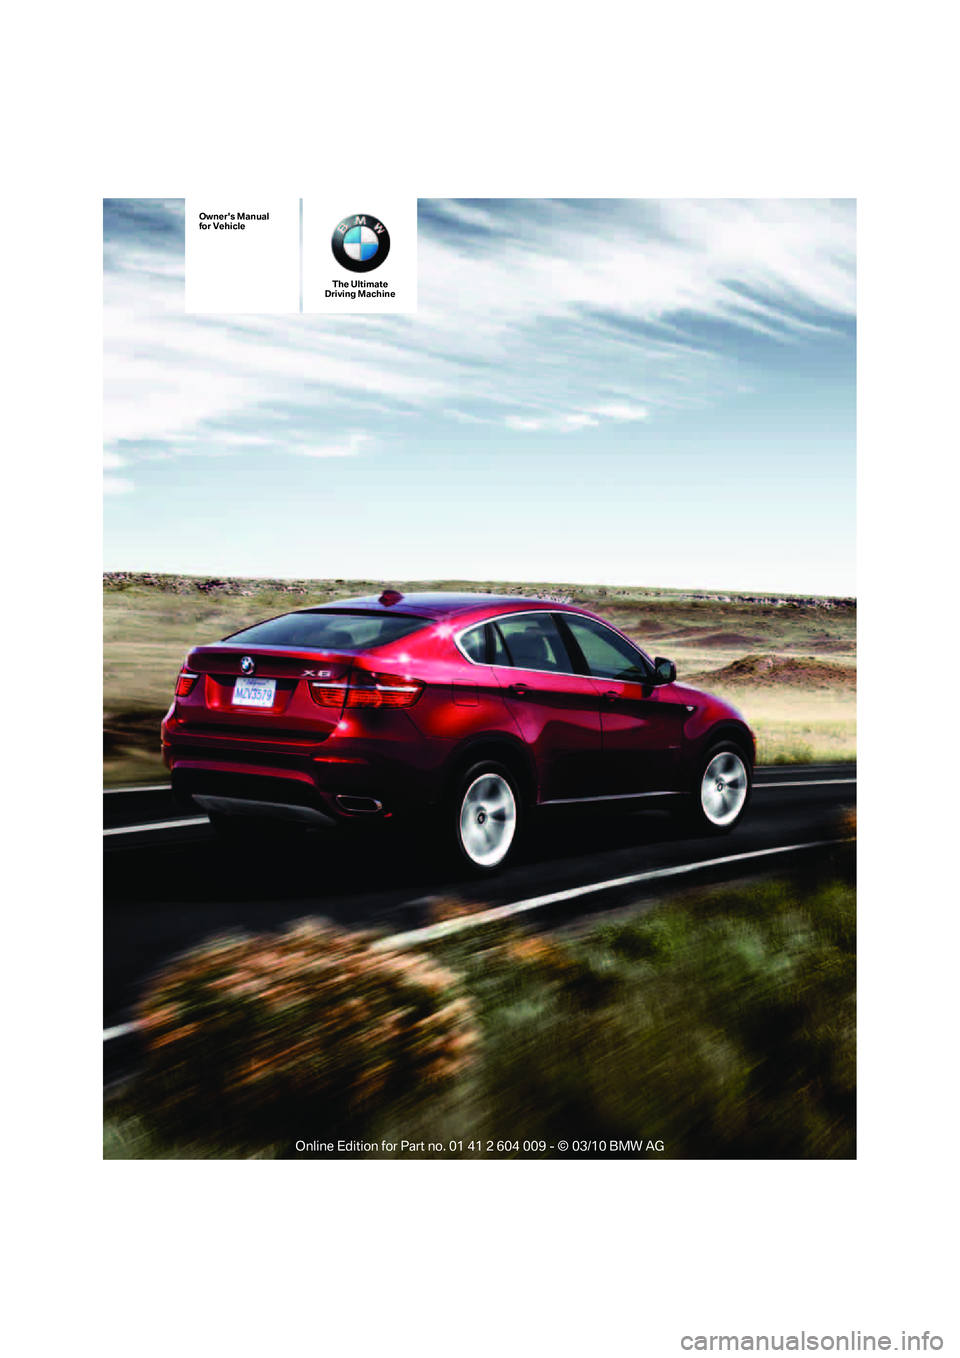 BMW ACTIVEHYBRID X6 2011  Owners Manual The Ultimate
Driving Machine
Owners Manual
for Vehicle 